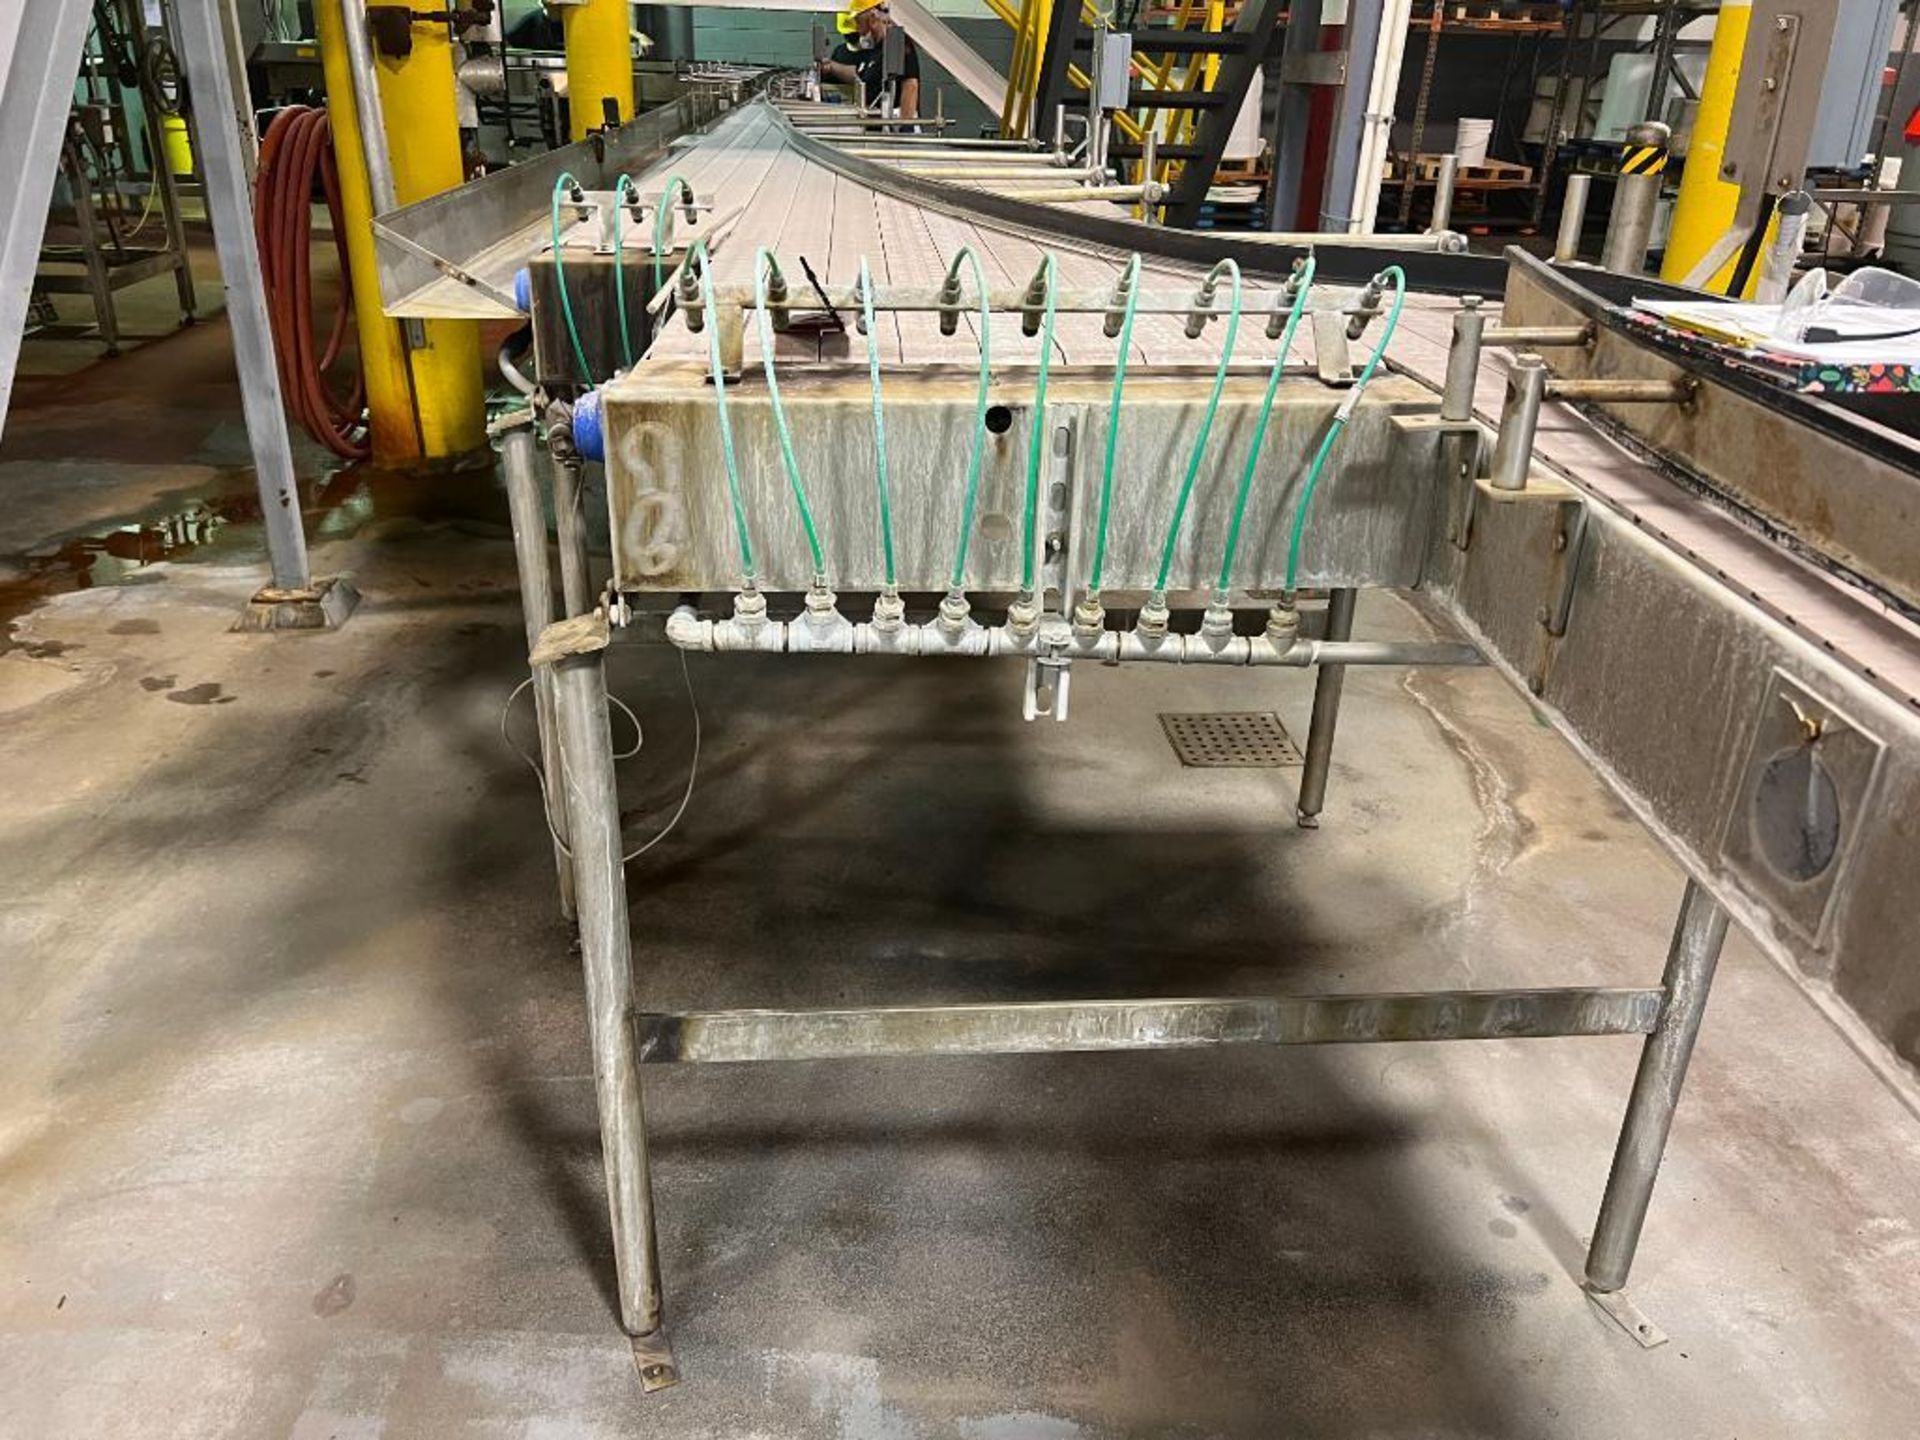 stainless steel step-belt can conveyor - Image 10 of 25